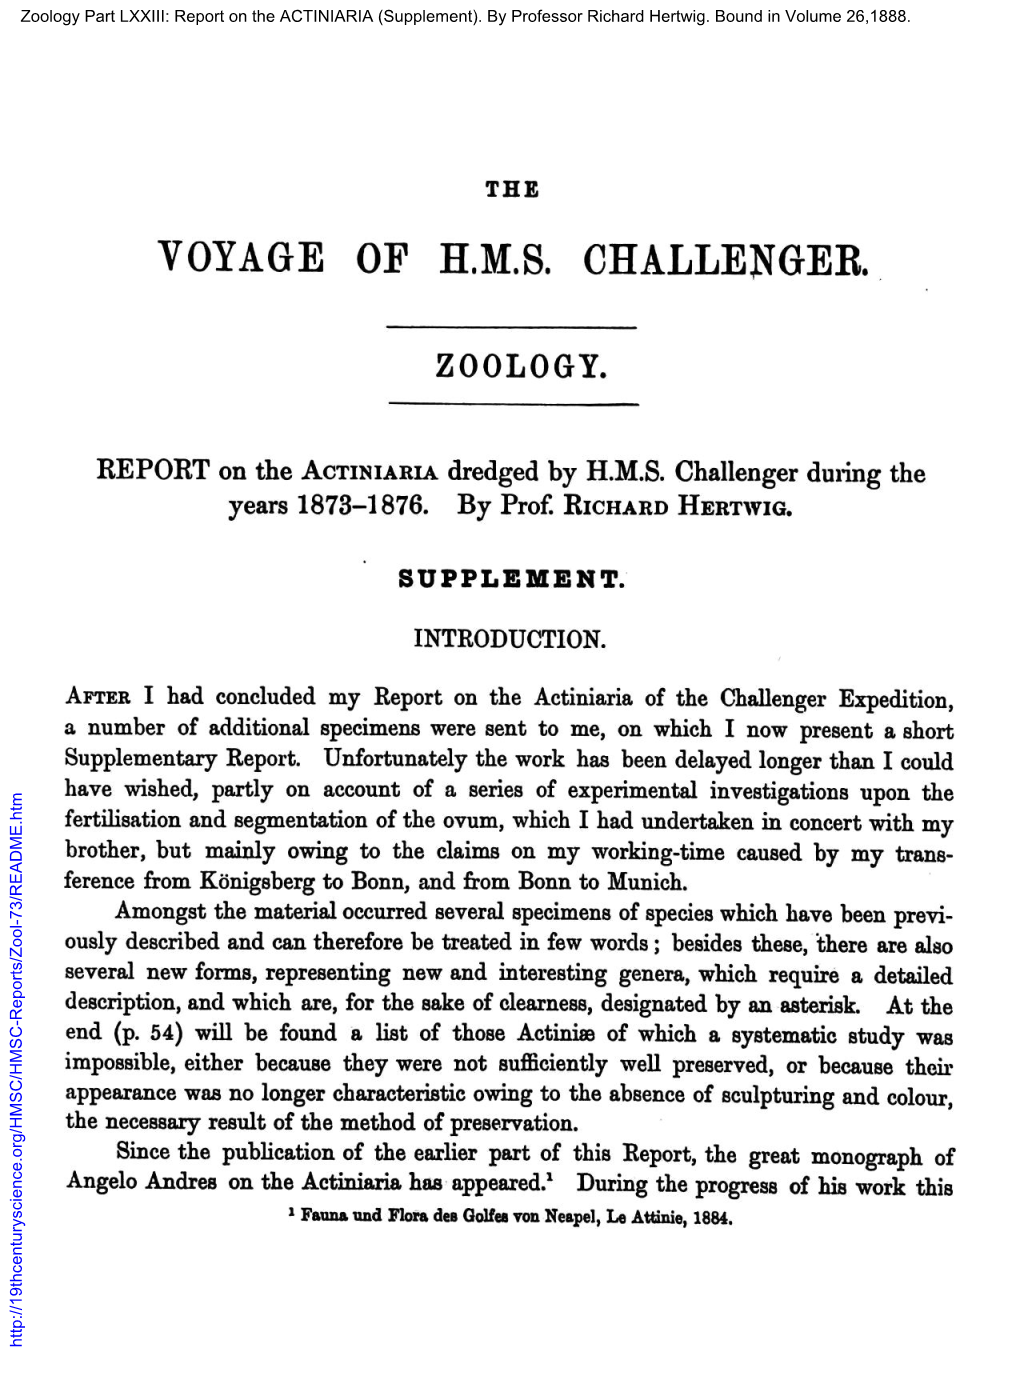 TEE VOYAGE of HMS CHALLENGER. ZOOLOGY. REPORT on The